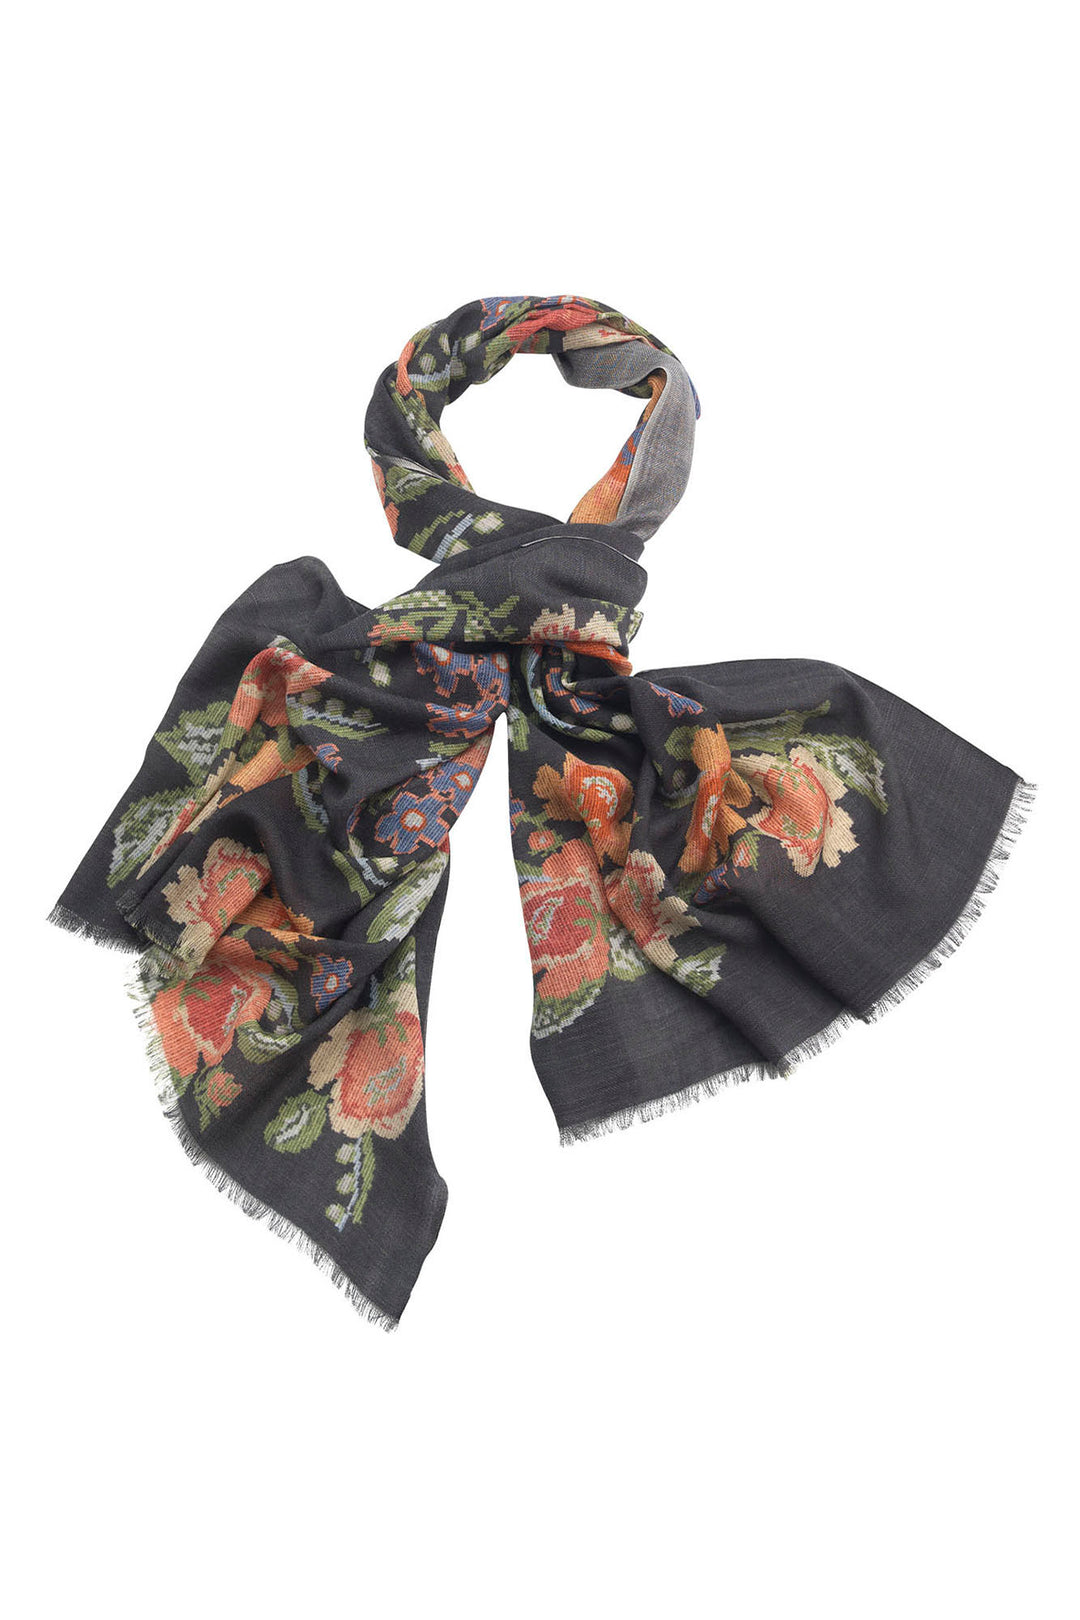 wool scarf ladies in woven flower print featuring colourful flowers on a black background by One Hundred Stars